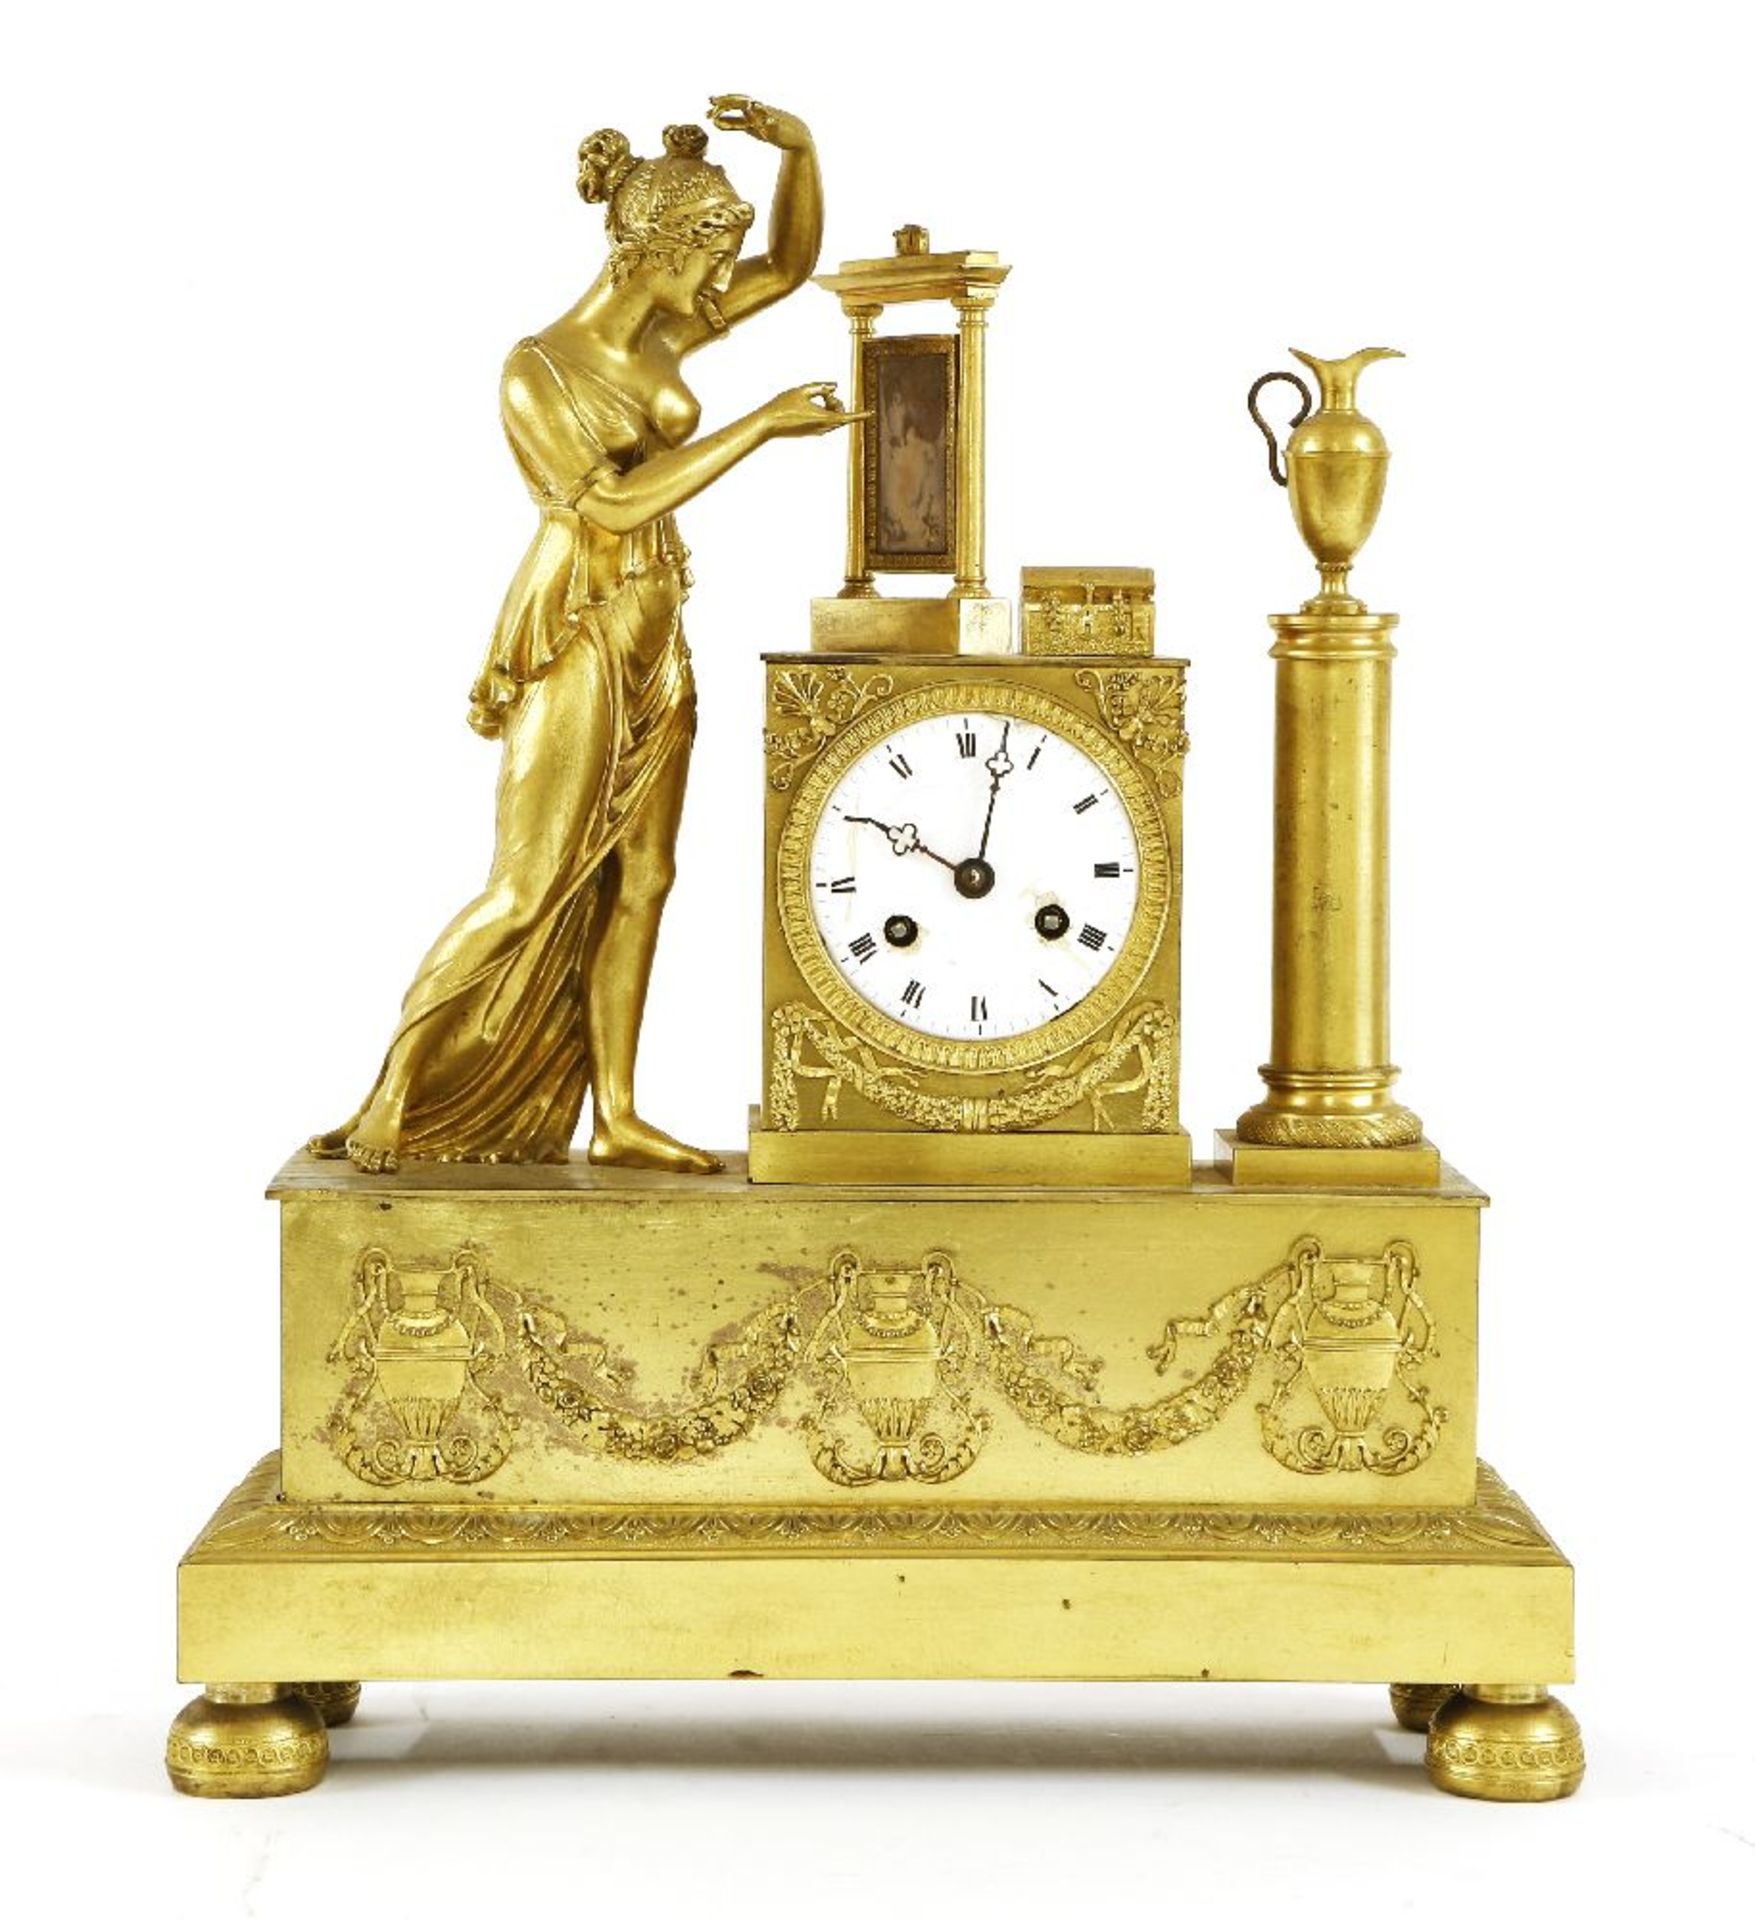 A large gilt metal mantel clock,late 19th century, with a white enamel dial flanked by a figural